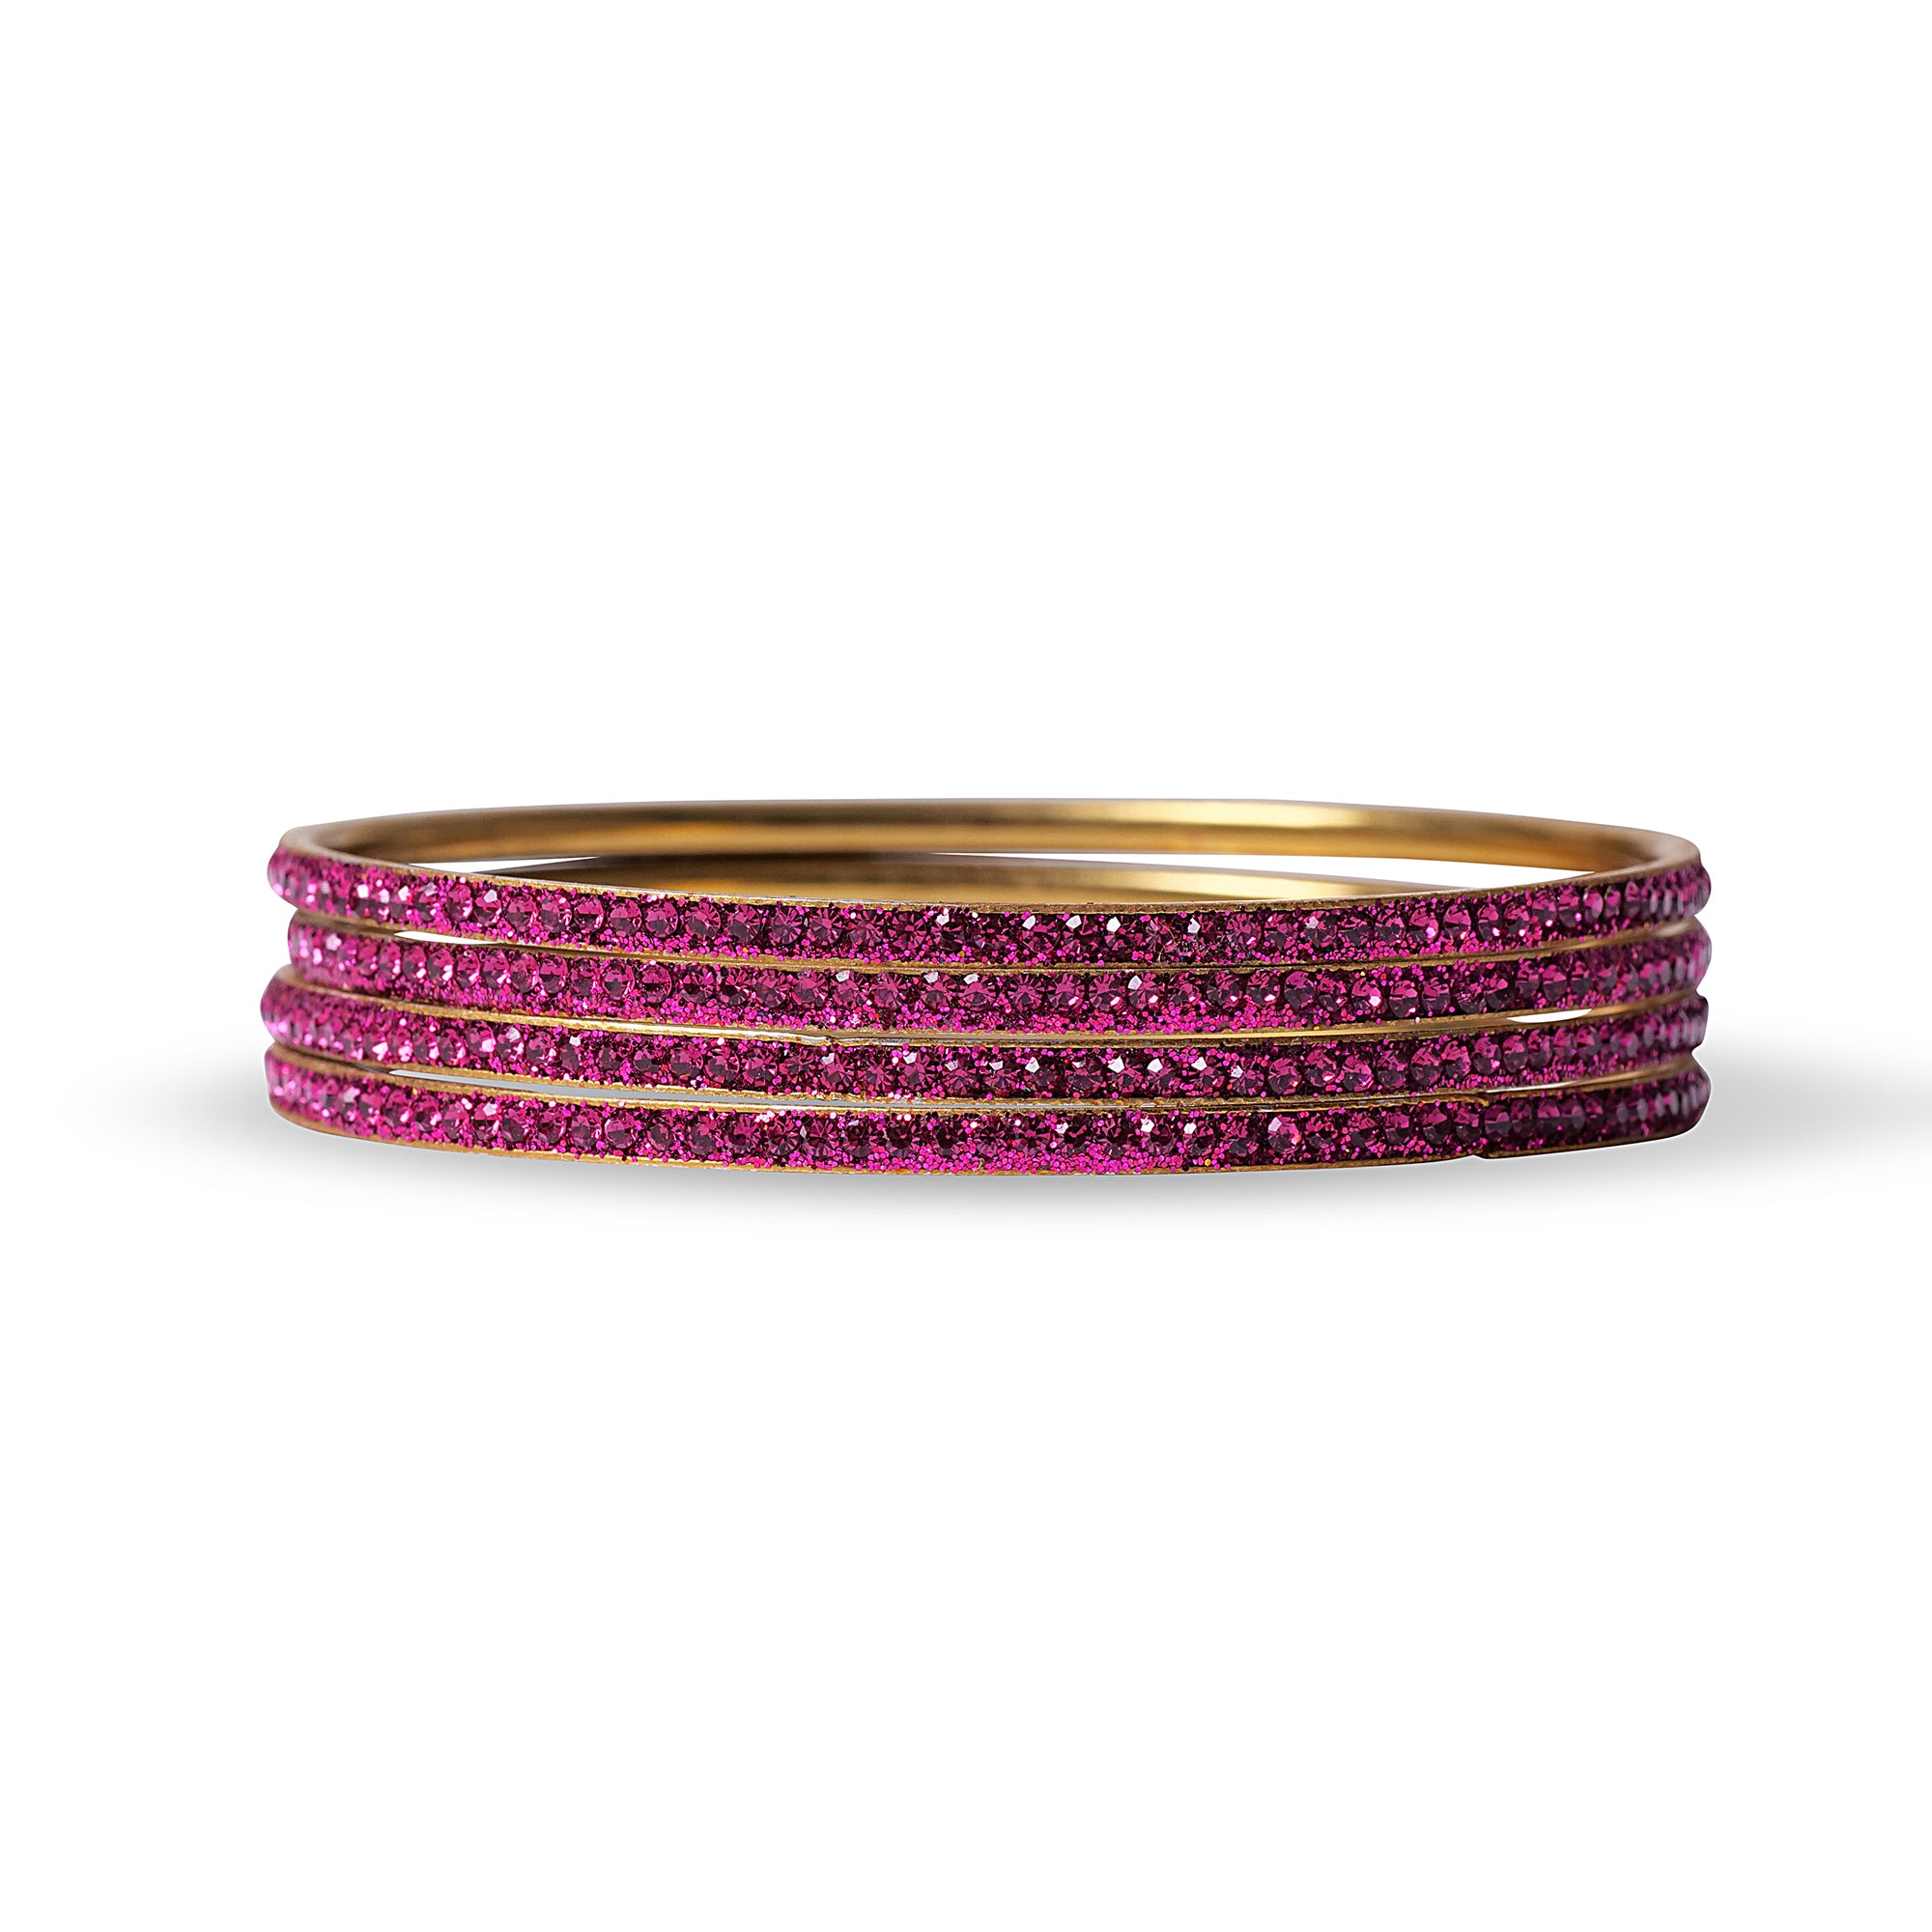 Glimmer Lakh Bangles in Pink